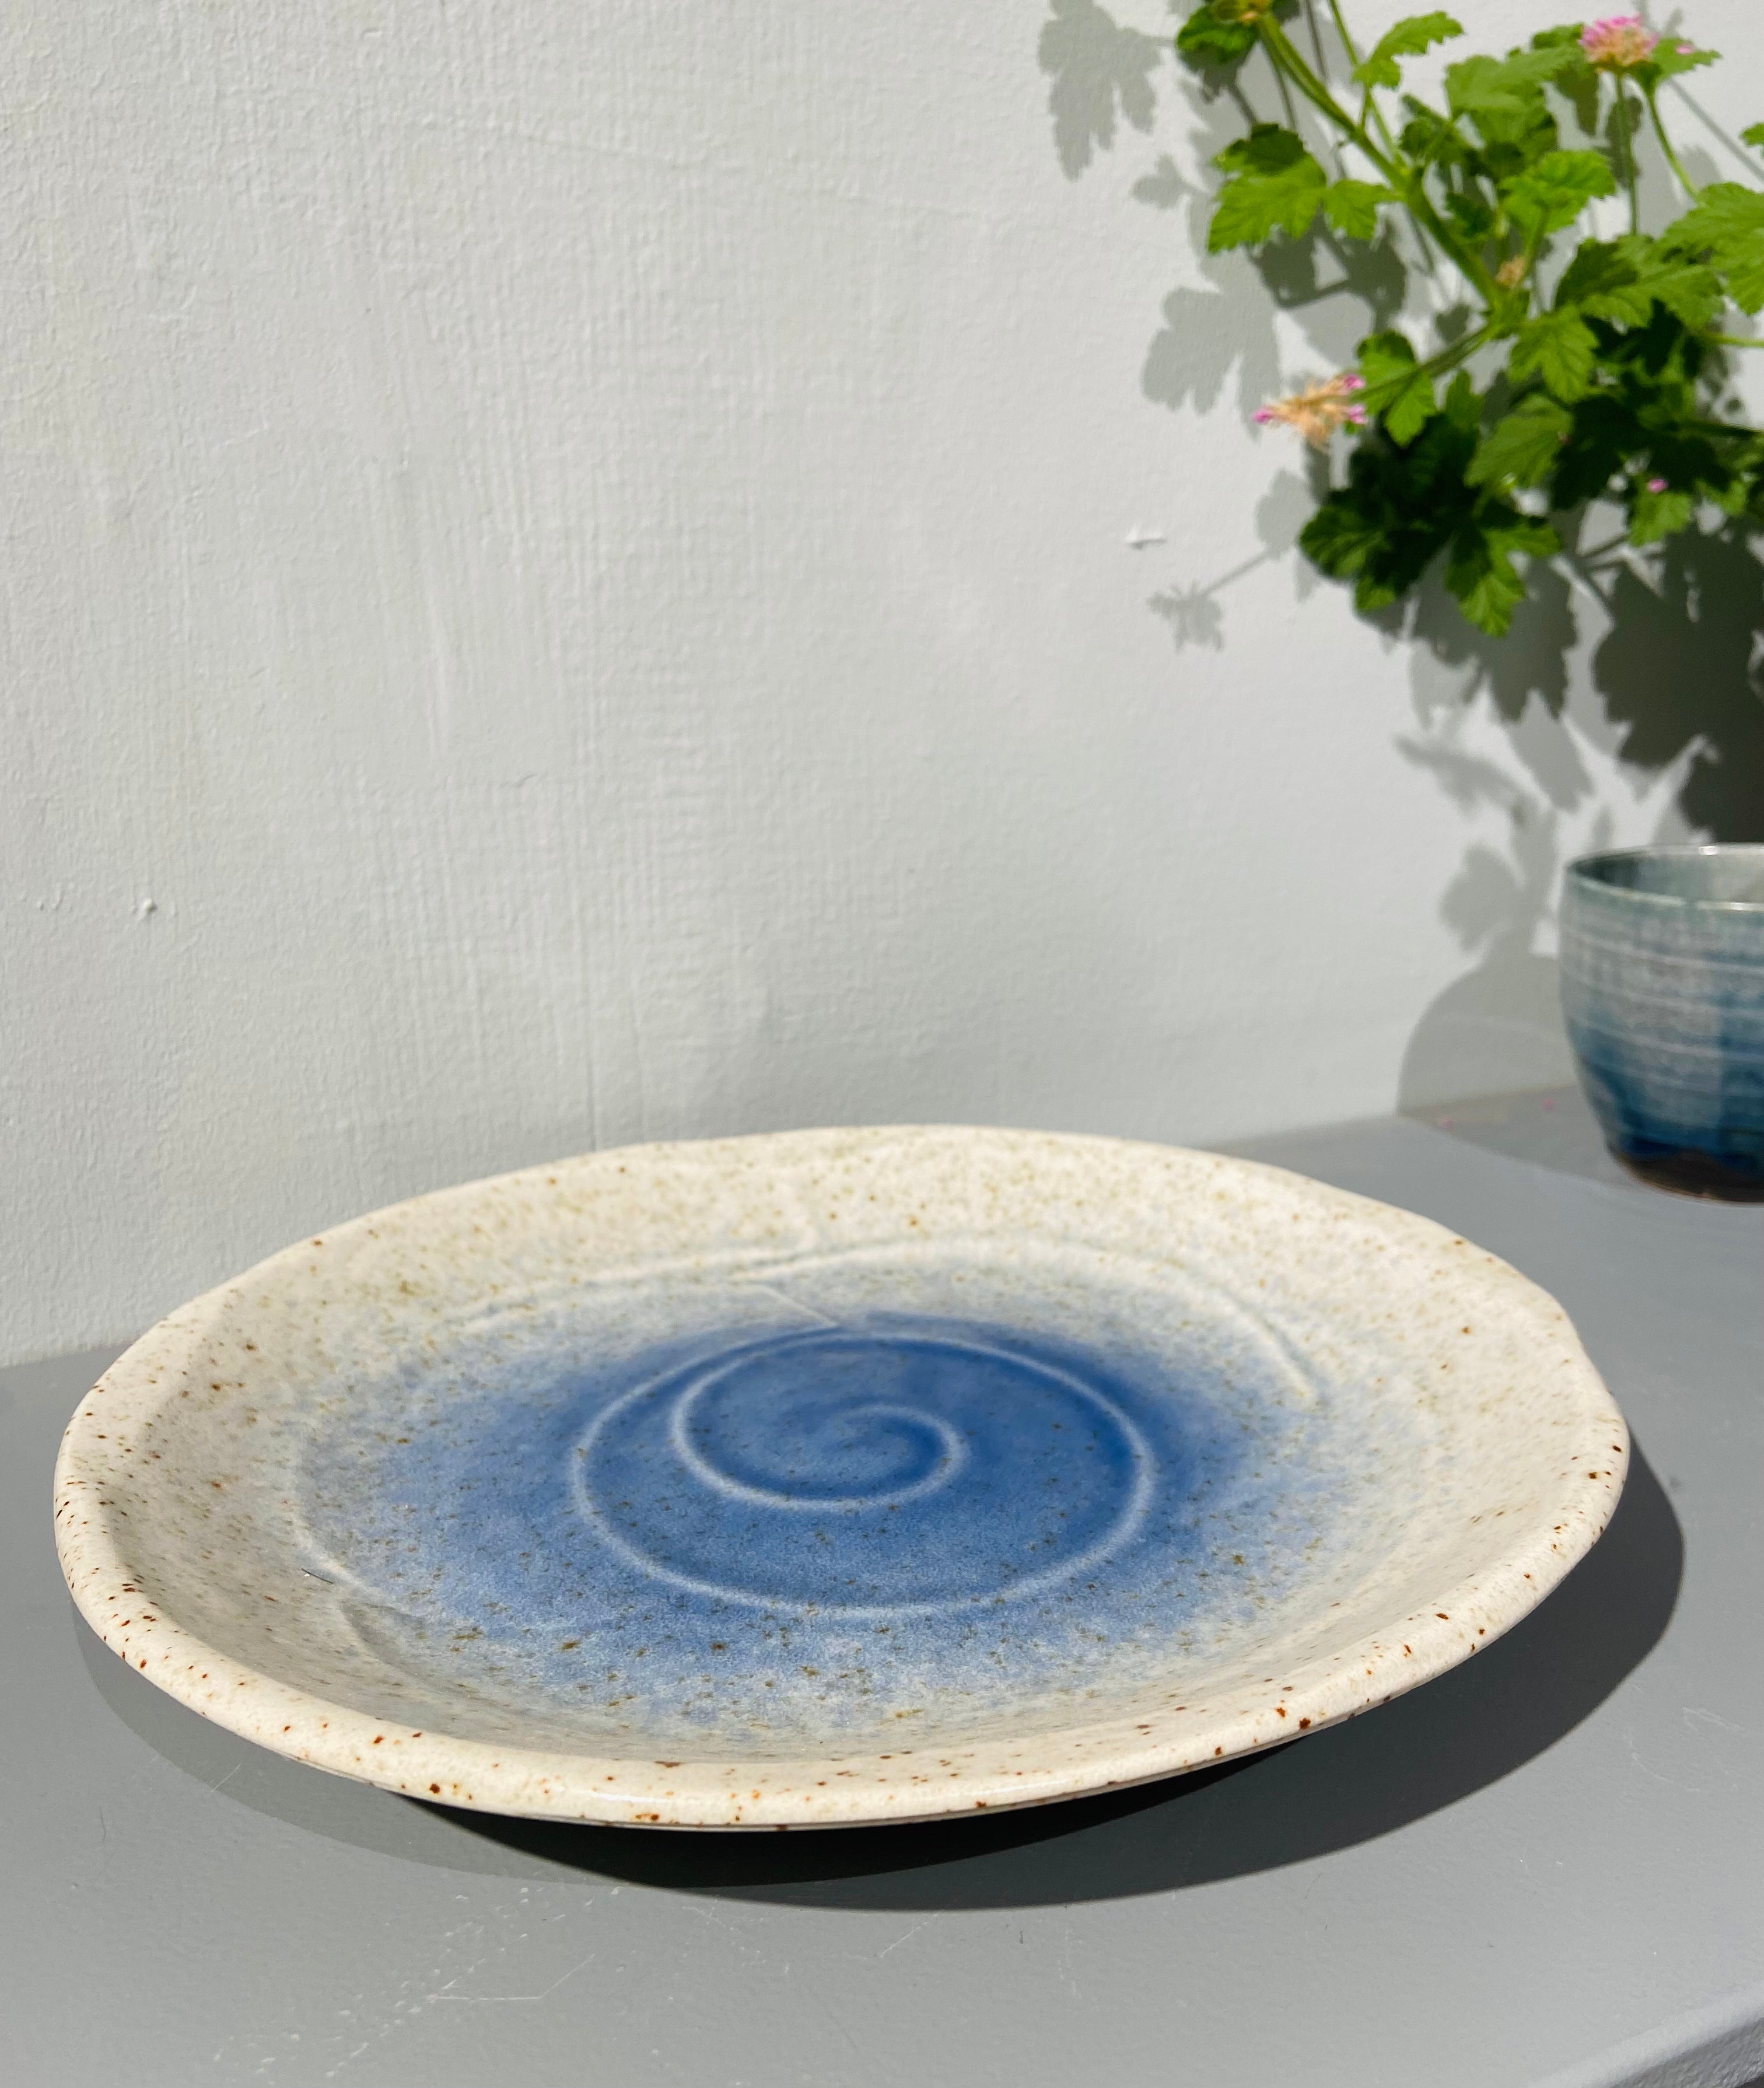 Dish/large plate with blue pattern